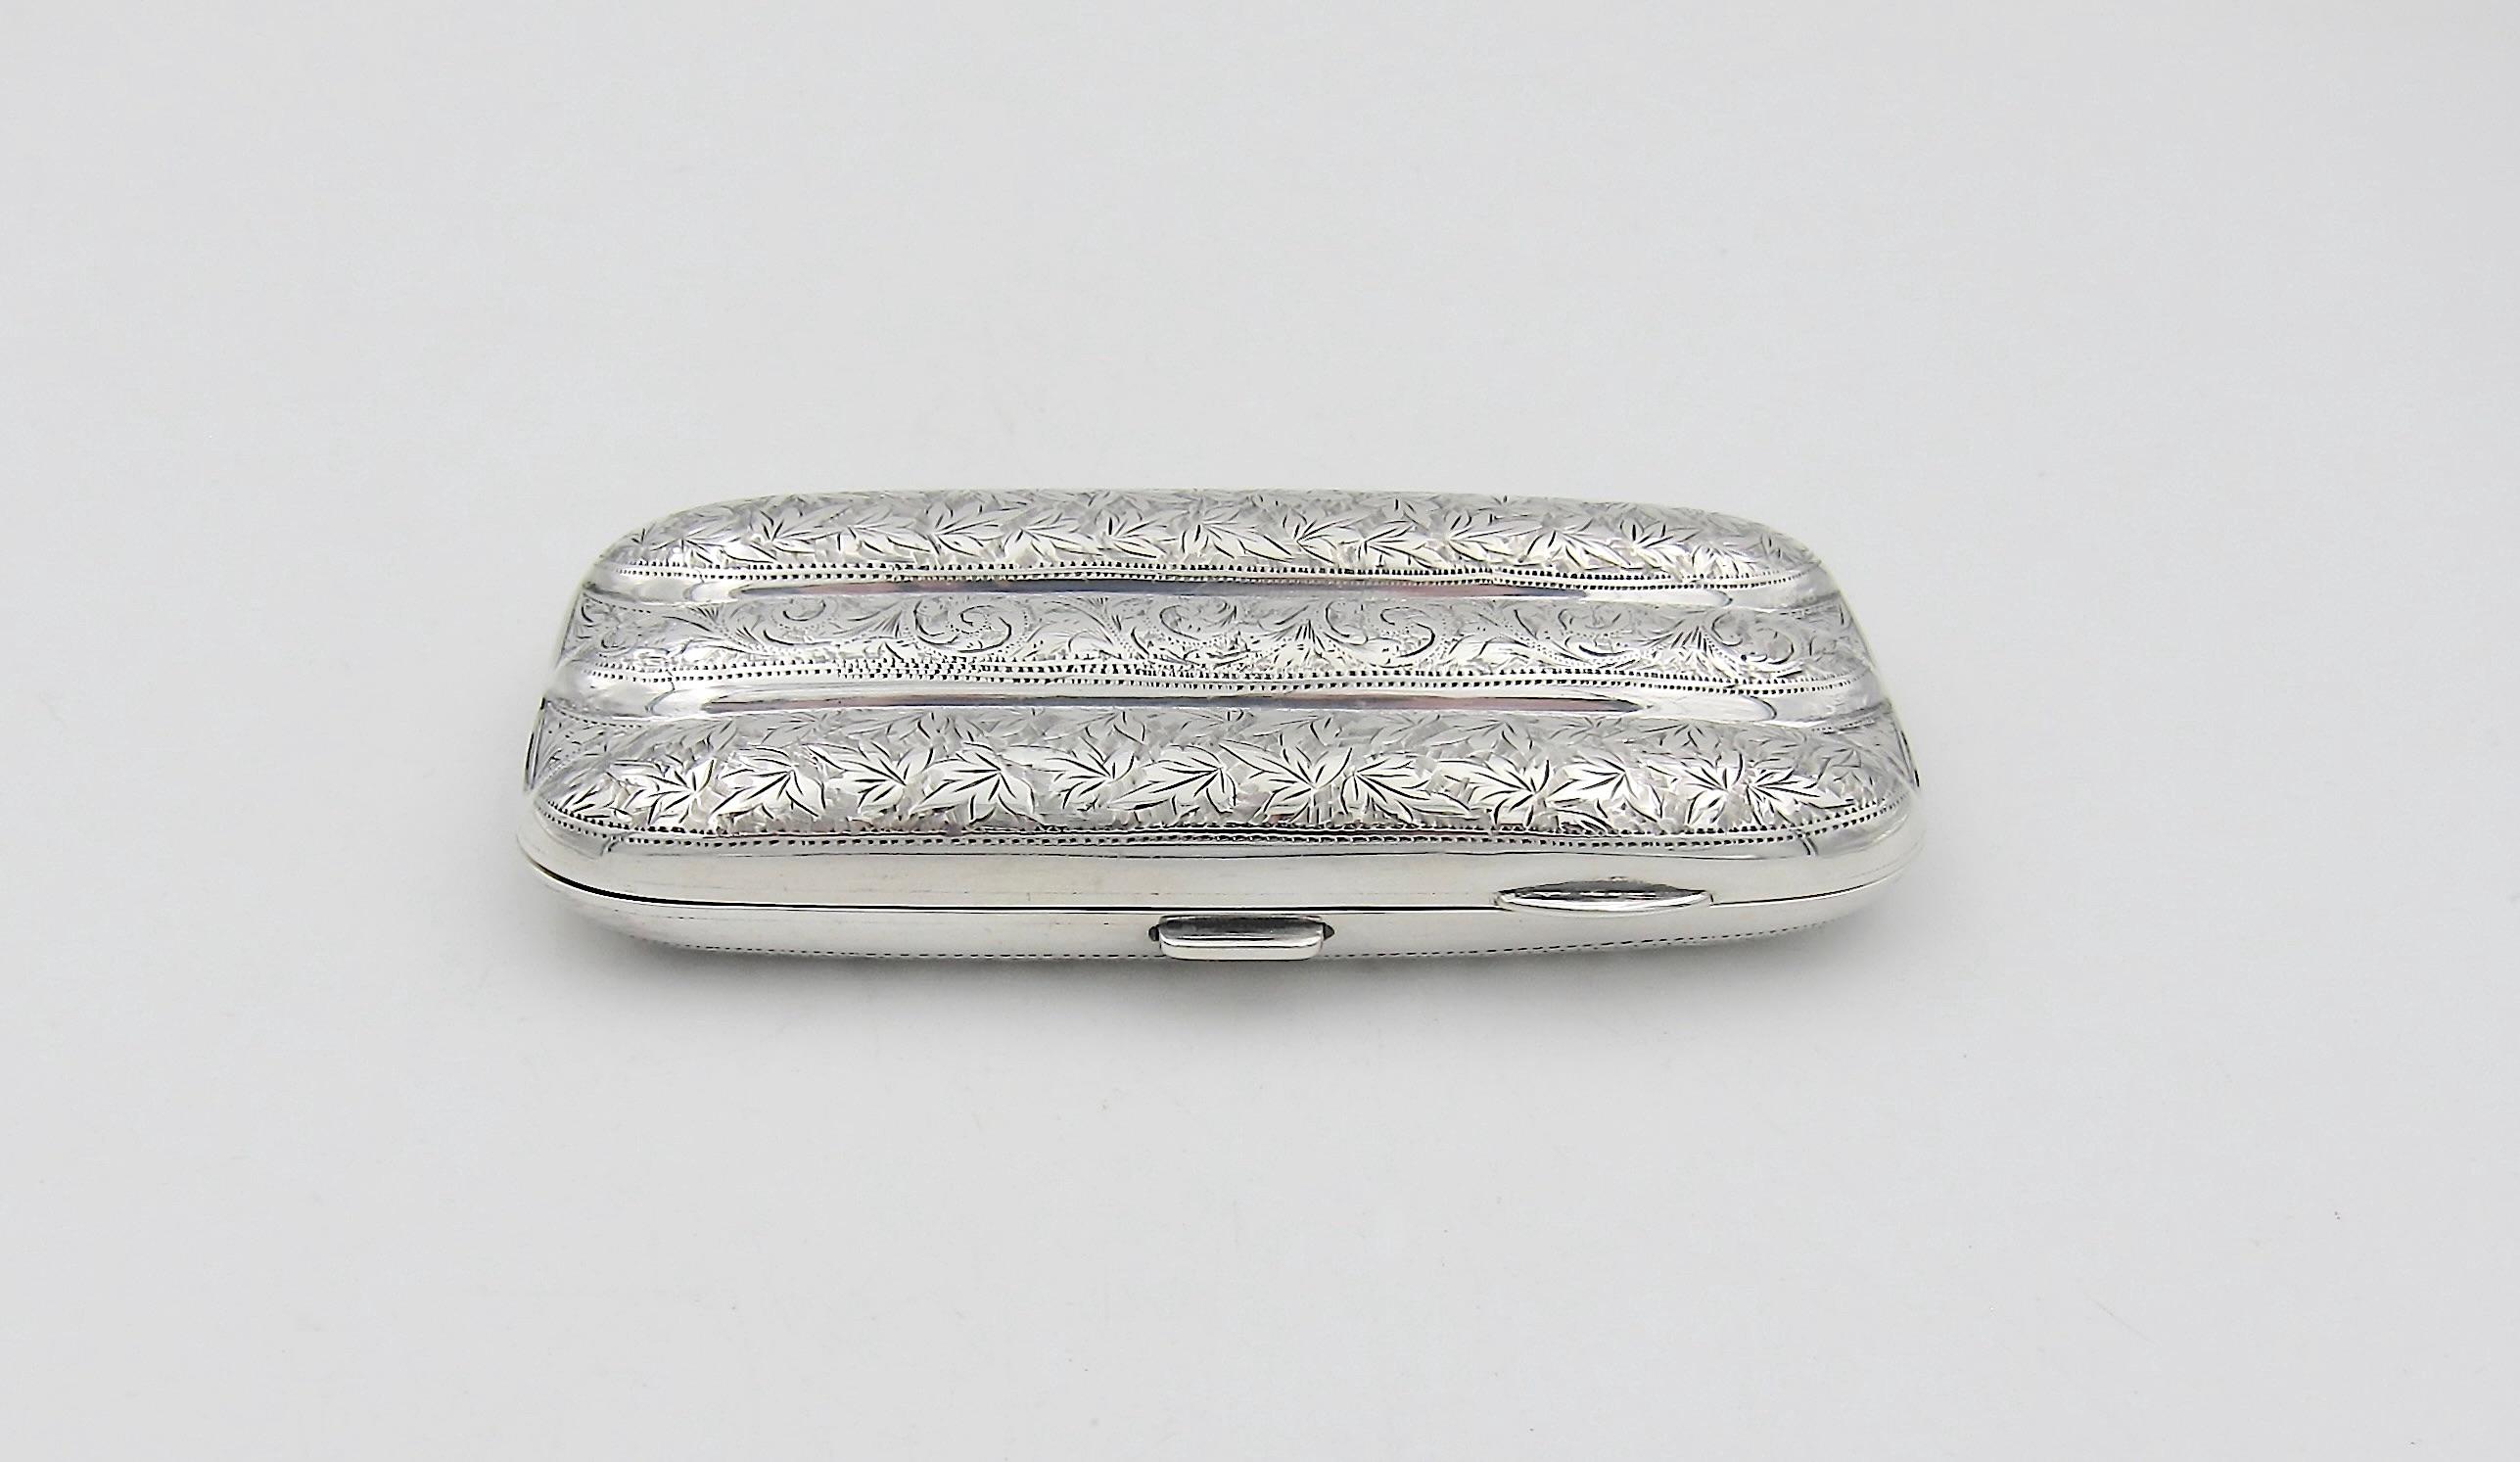 20th Century Antique Edwardian Three Tube Sterling Silver Cigar Case From William Aitken 1901